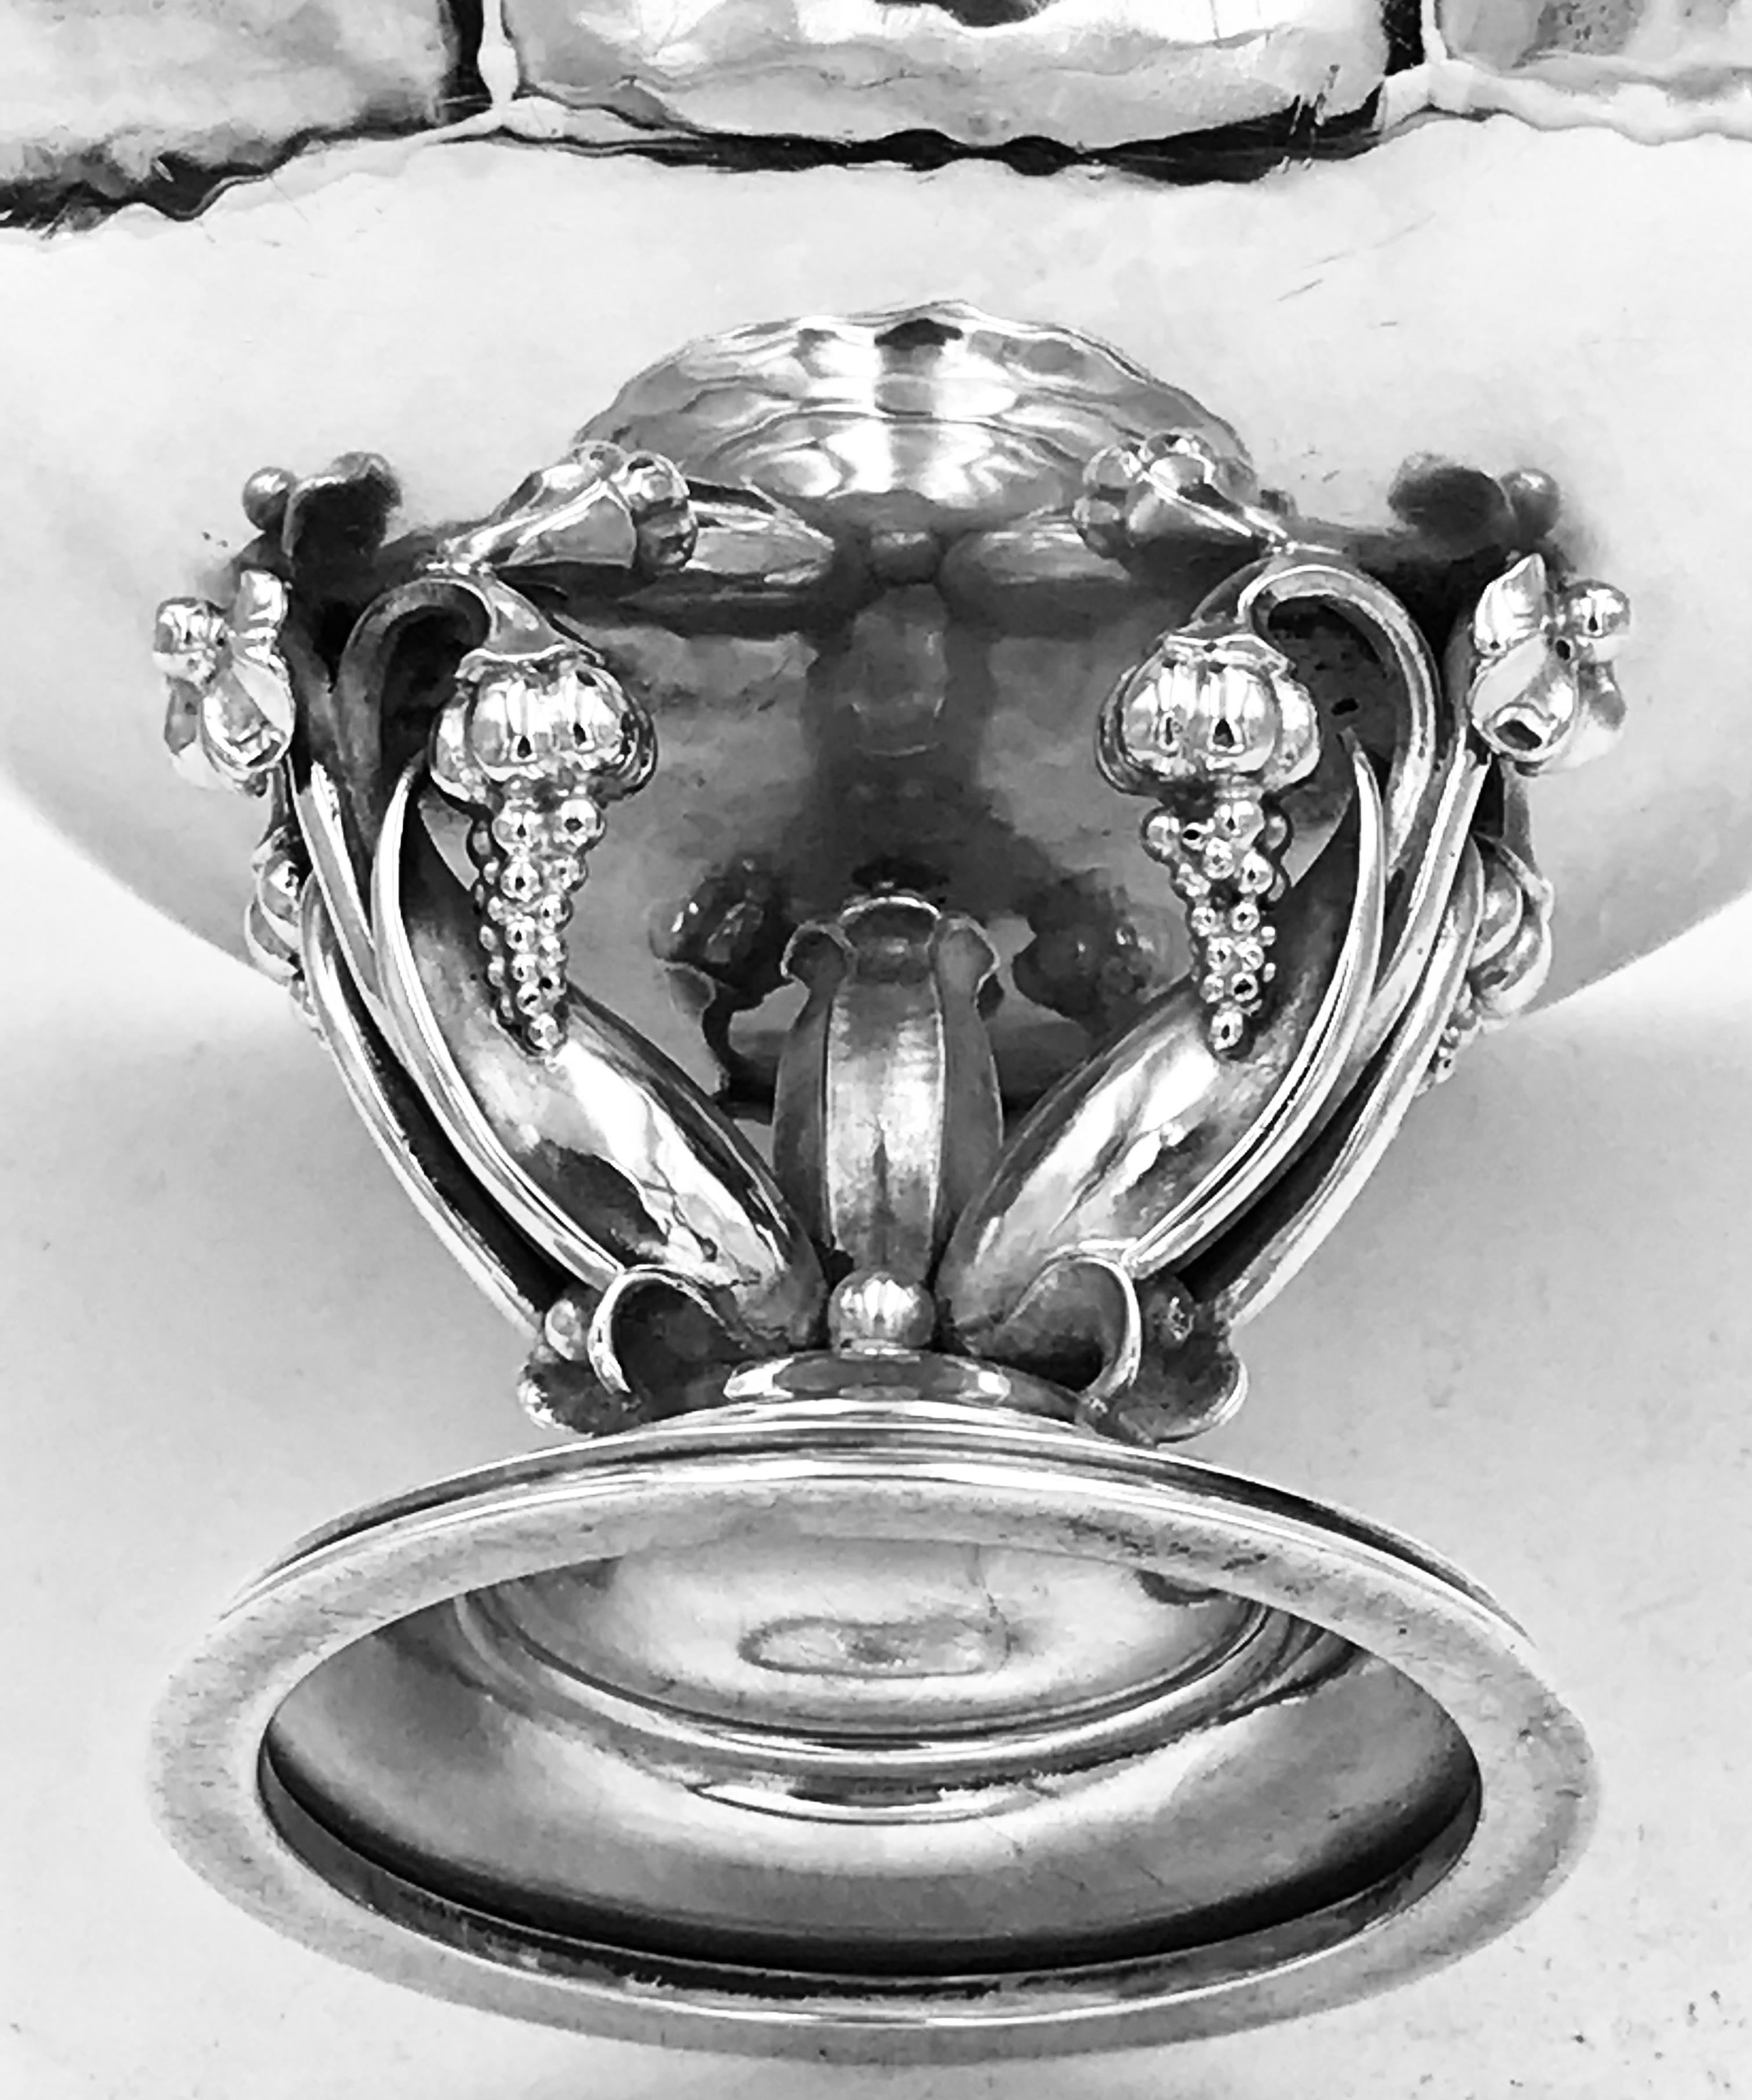 A lovely silver Georg Jensen Bowl with grape and floral decoration.
This bowl was designed by Gundorph Albertus for the firm of Georg Jensen.
It has an English import mark for 1930.